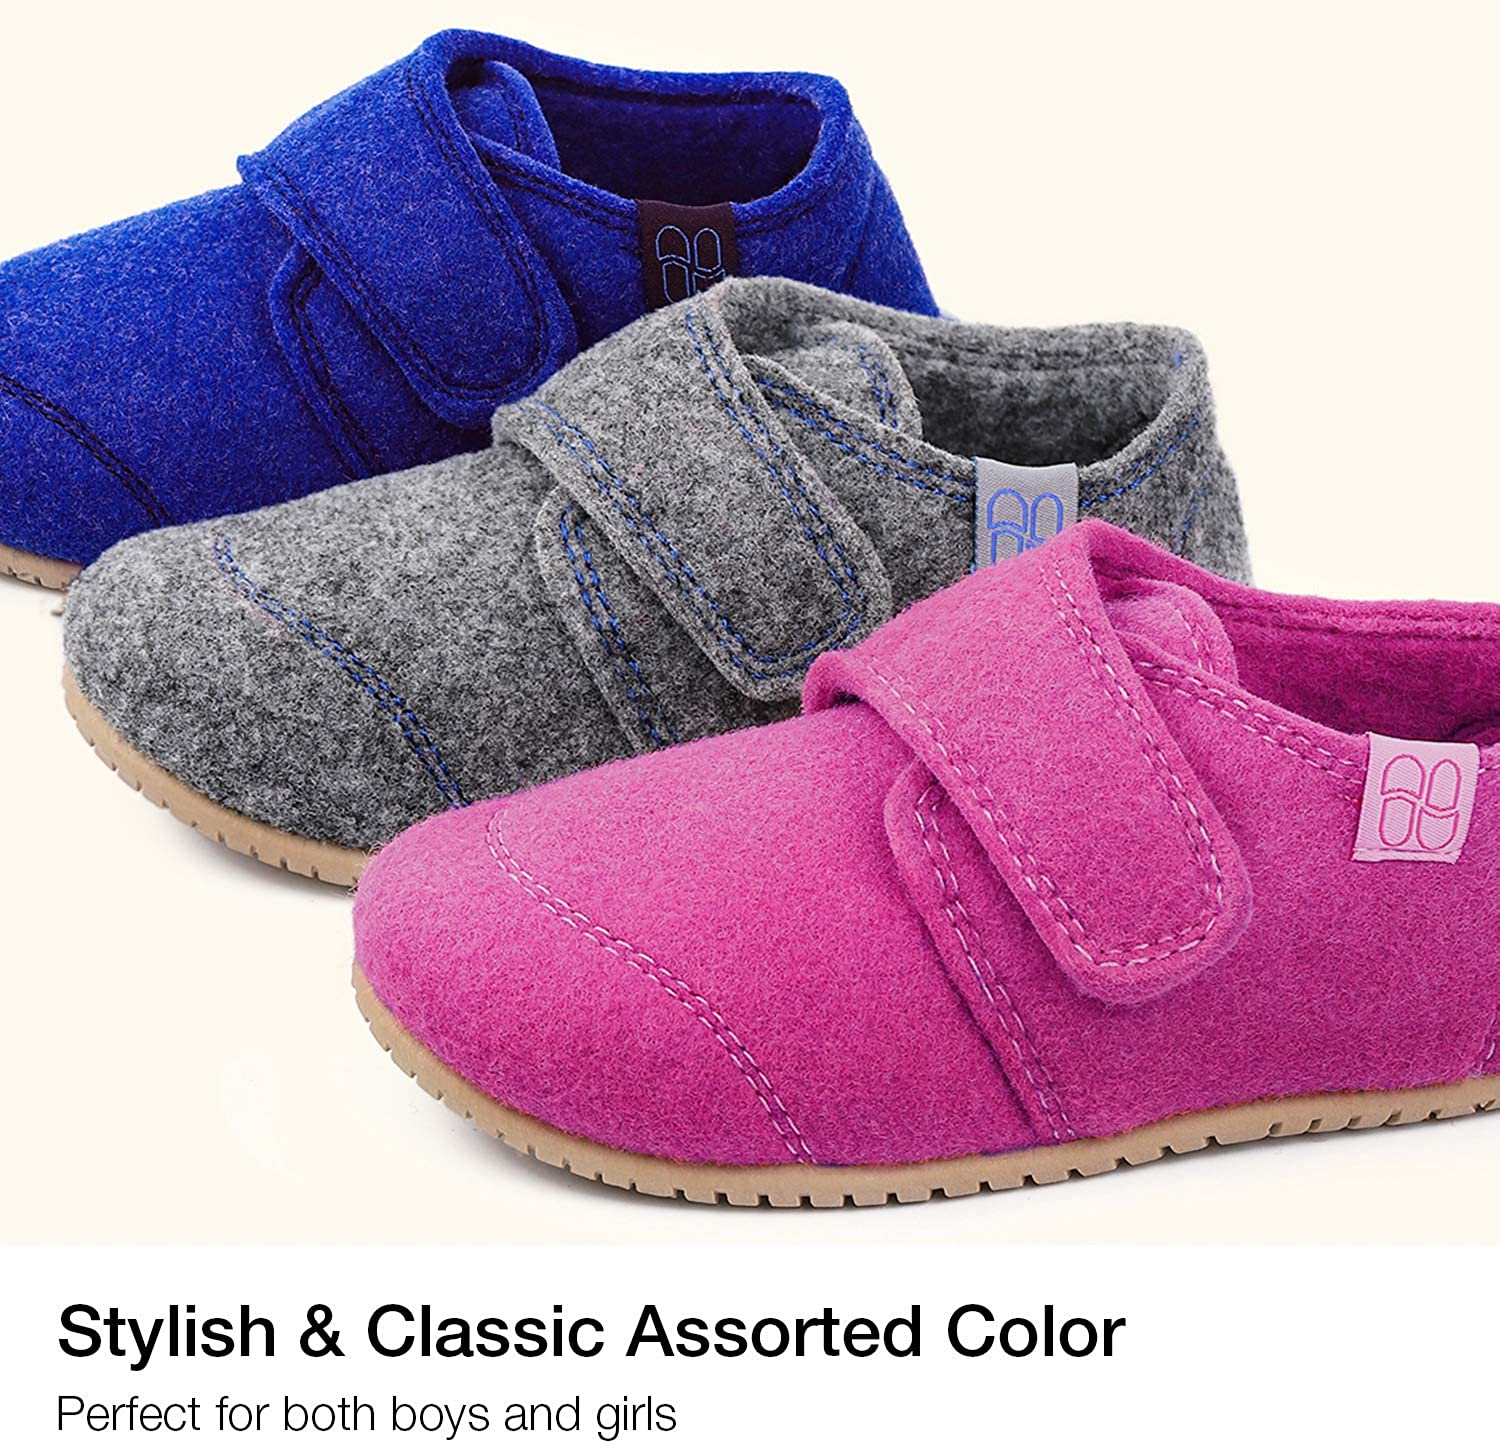 HomeTop Boys Girls Soft Wool Felt House Shoes with Adjustable Hook and Loop - e4cents